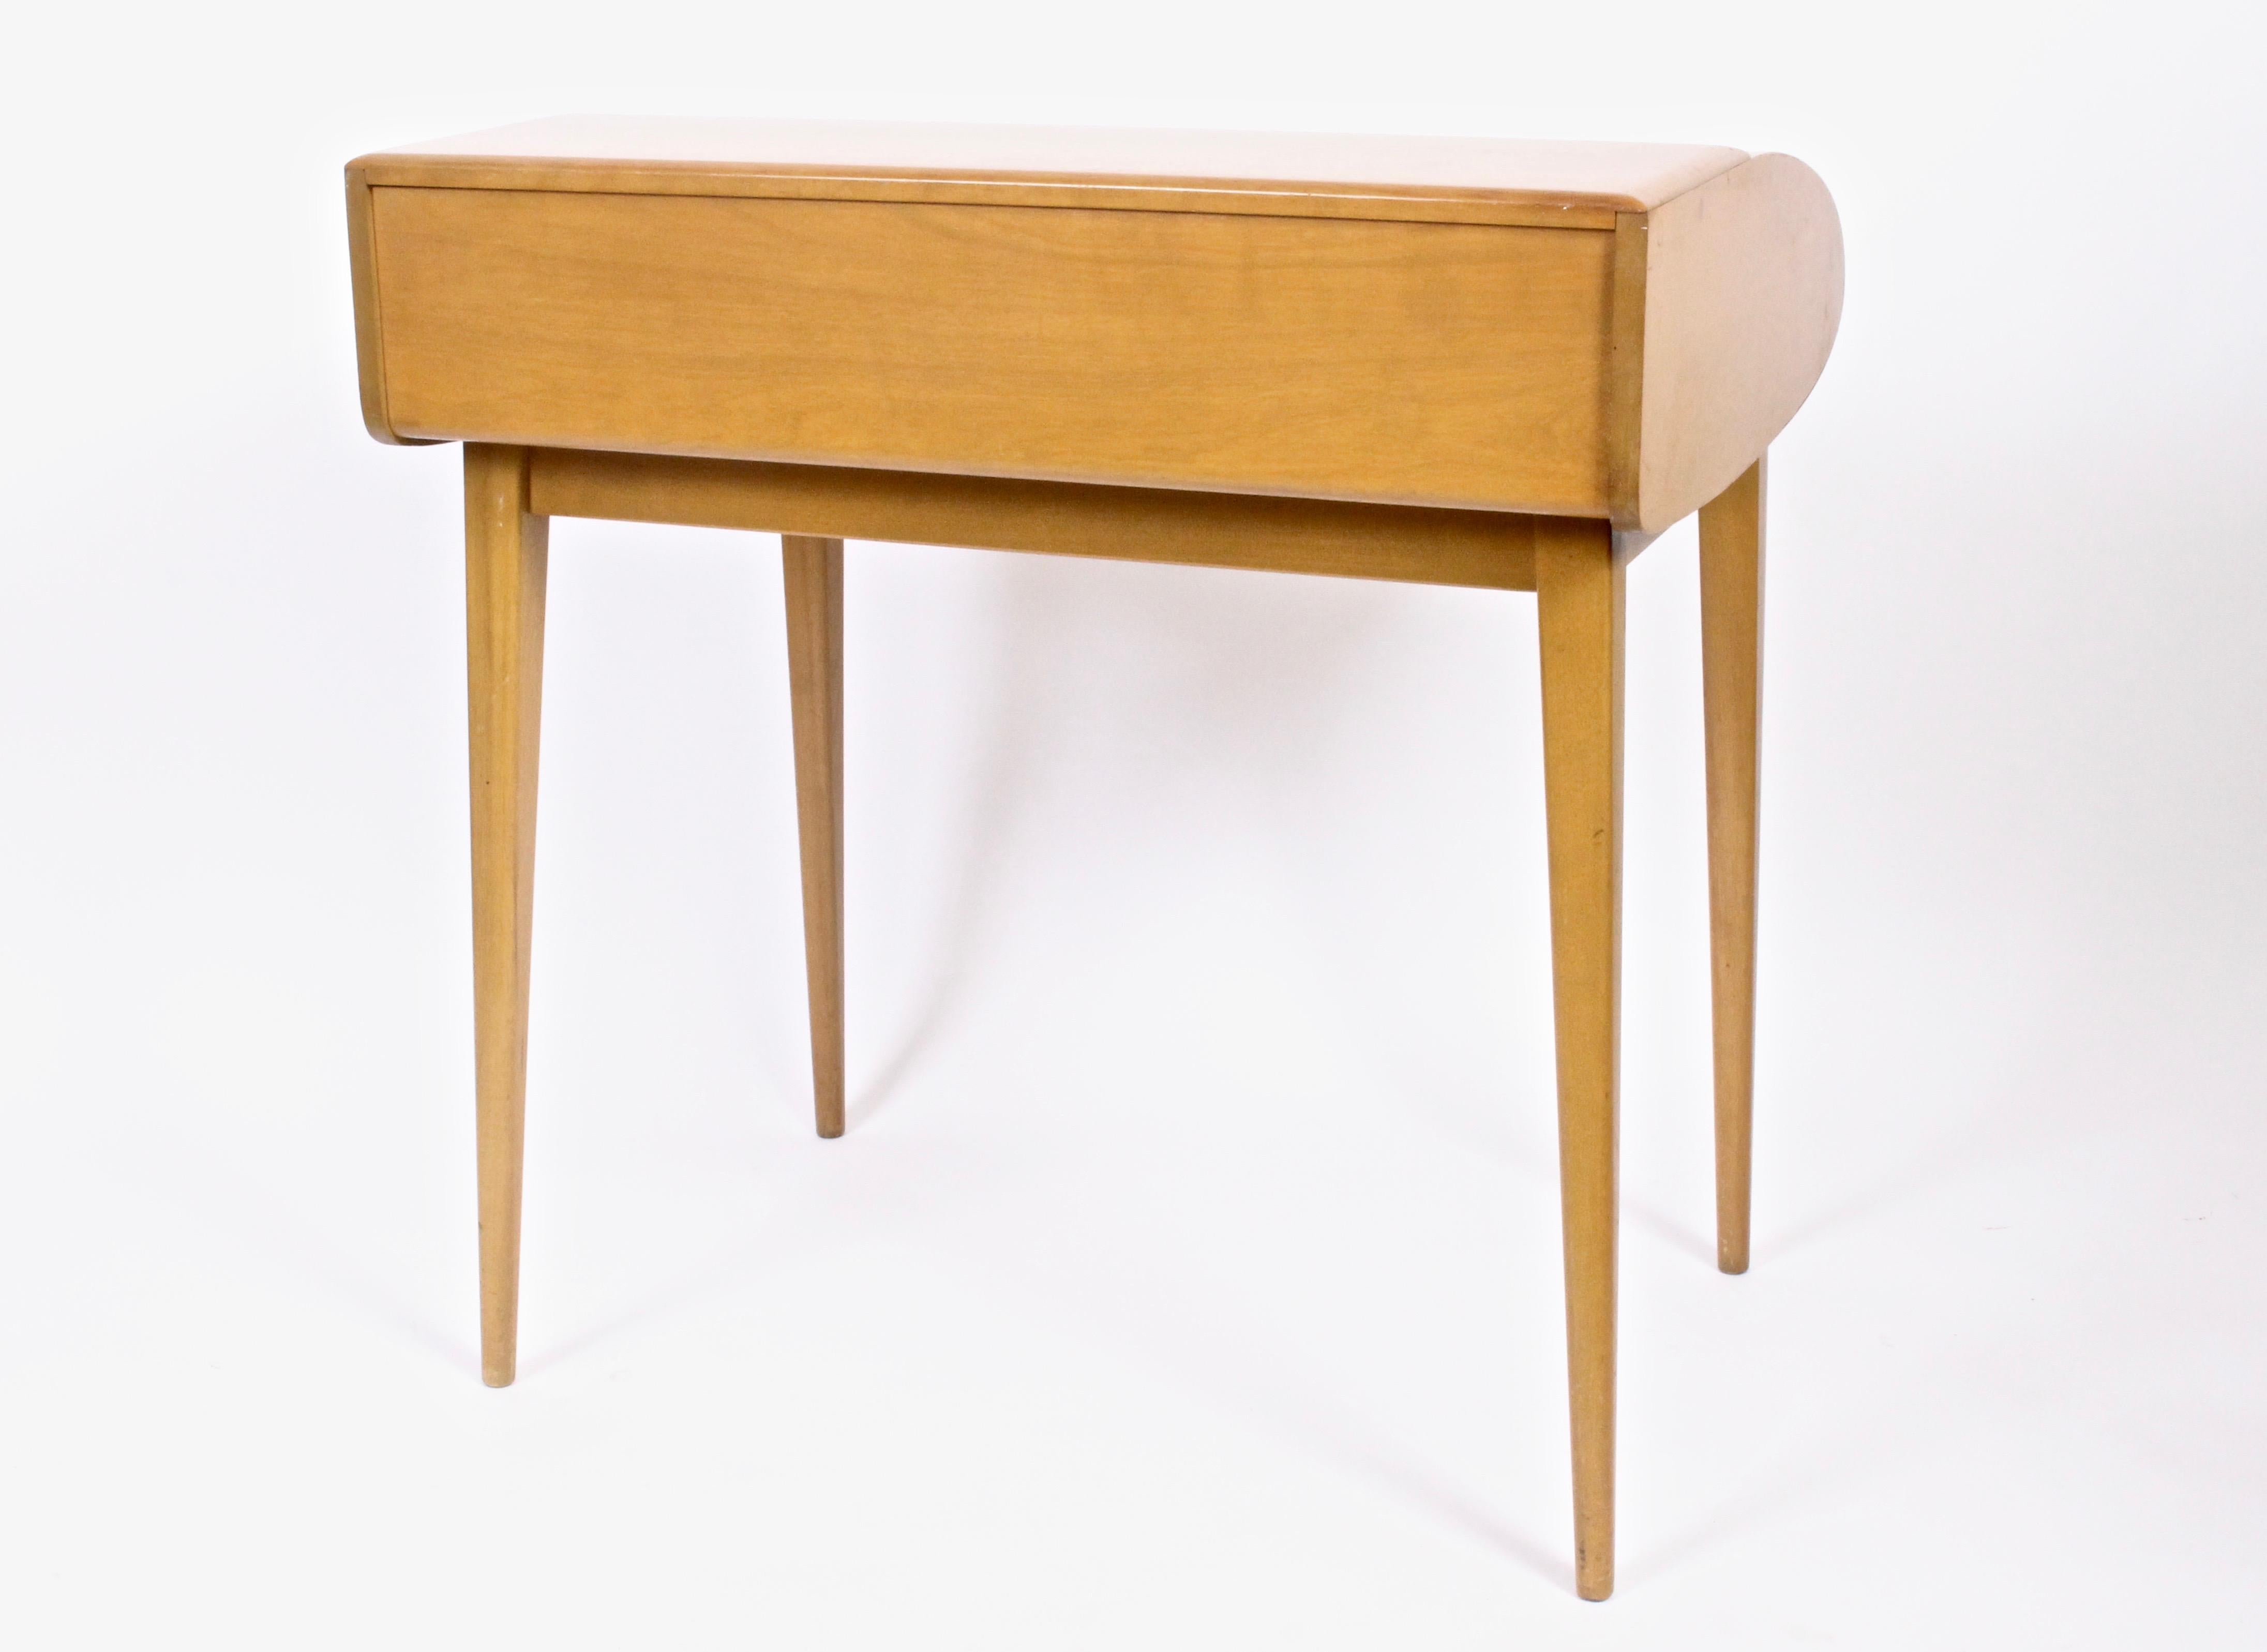 Classic American midcentury Heywood-Wakefield Petite Tambour Desk. With finished back. Featuring six interior compartments. Legs attach and detach with wingnuts. Amber finish. Rarity. Sleek. Storage. Small footprint. With Eagle burn stamp inside